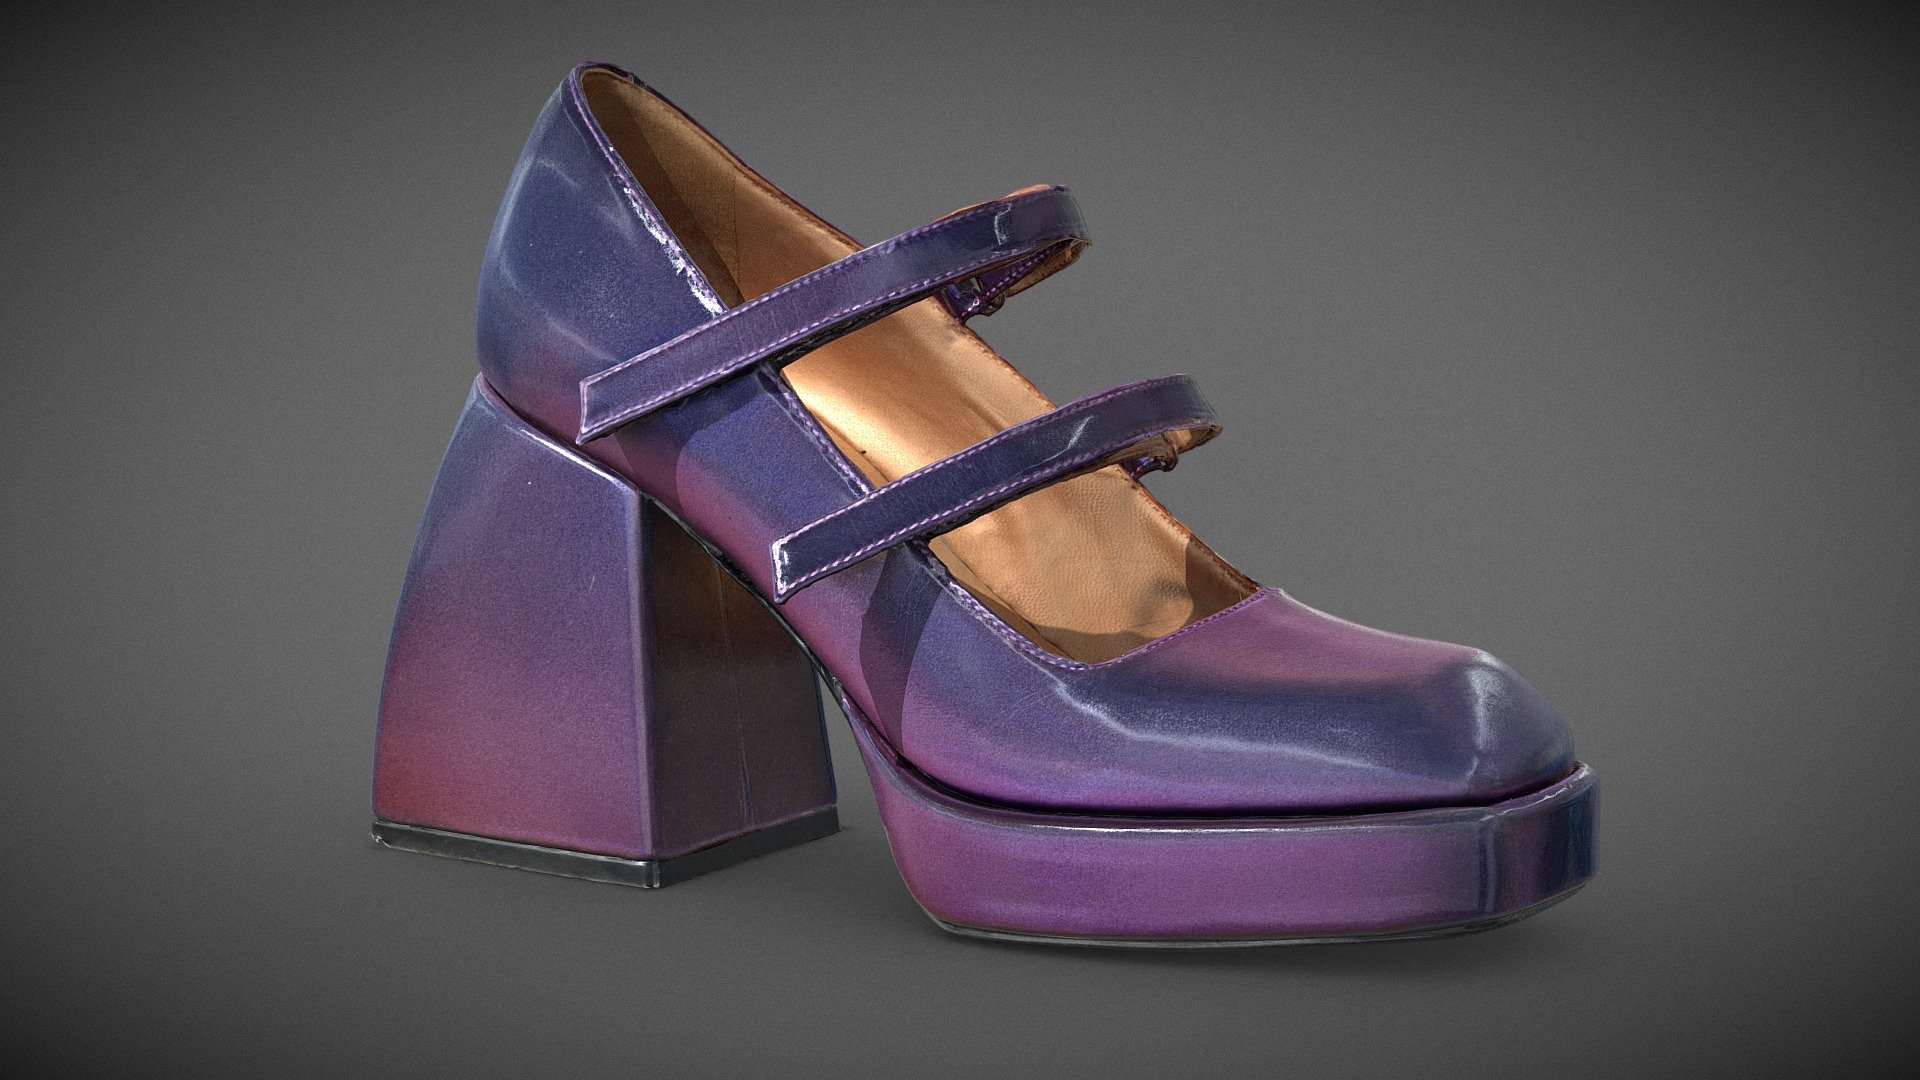 Photogrammetry scan of this Nodaleto Bulla Babies Purple shoes gameready asset with PBR 4K textures 3d model